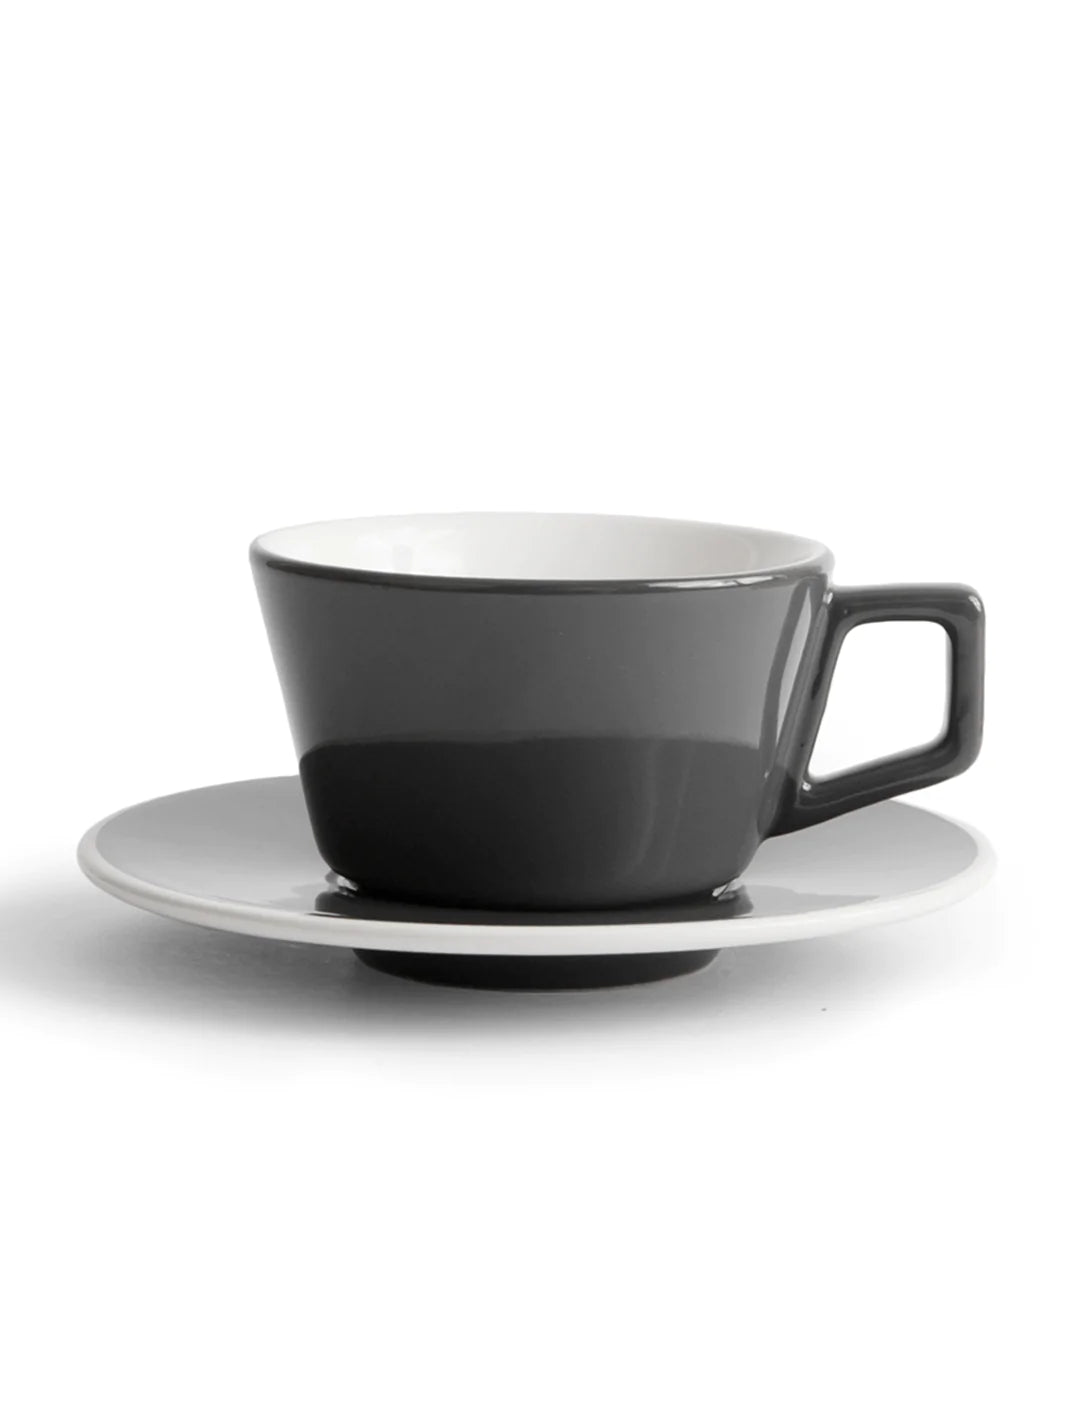 CREATED CO. Angle Cappuccino & Small Latte Saucer (Saucer Only)